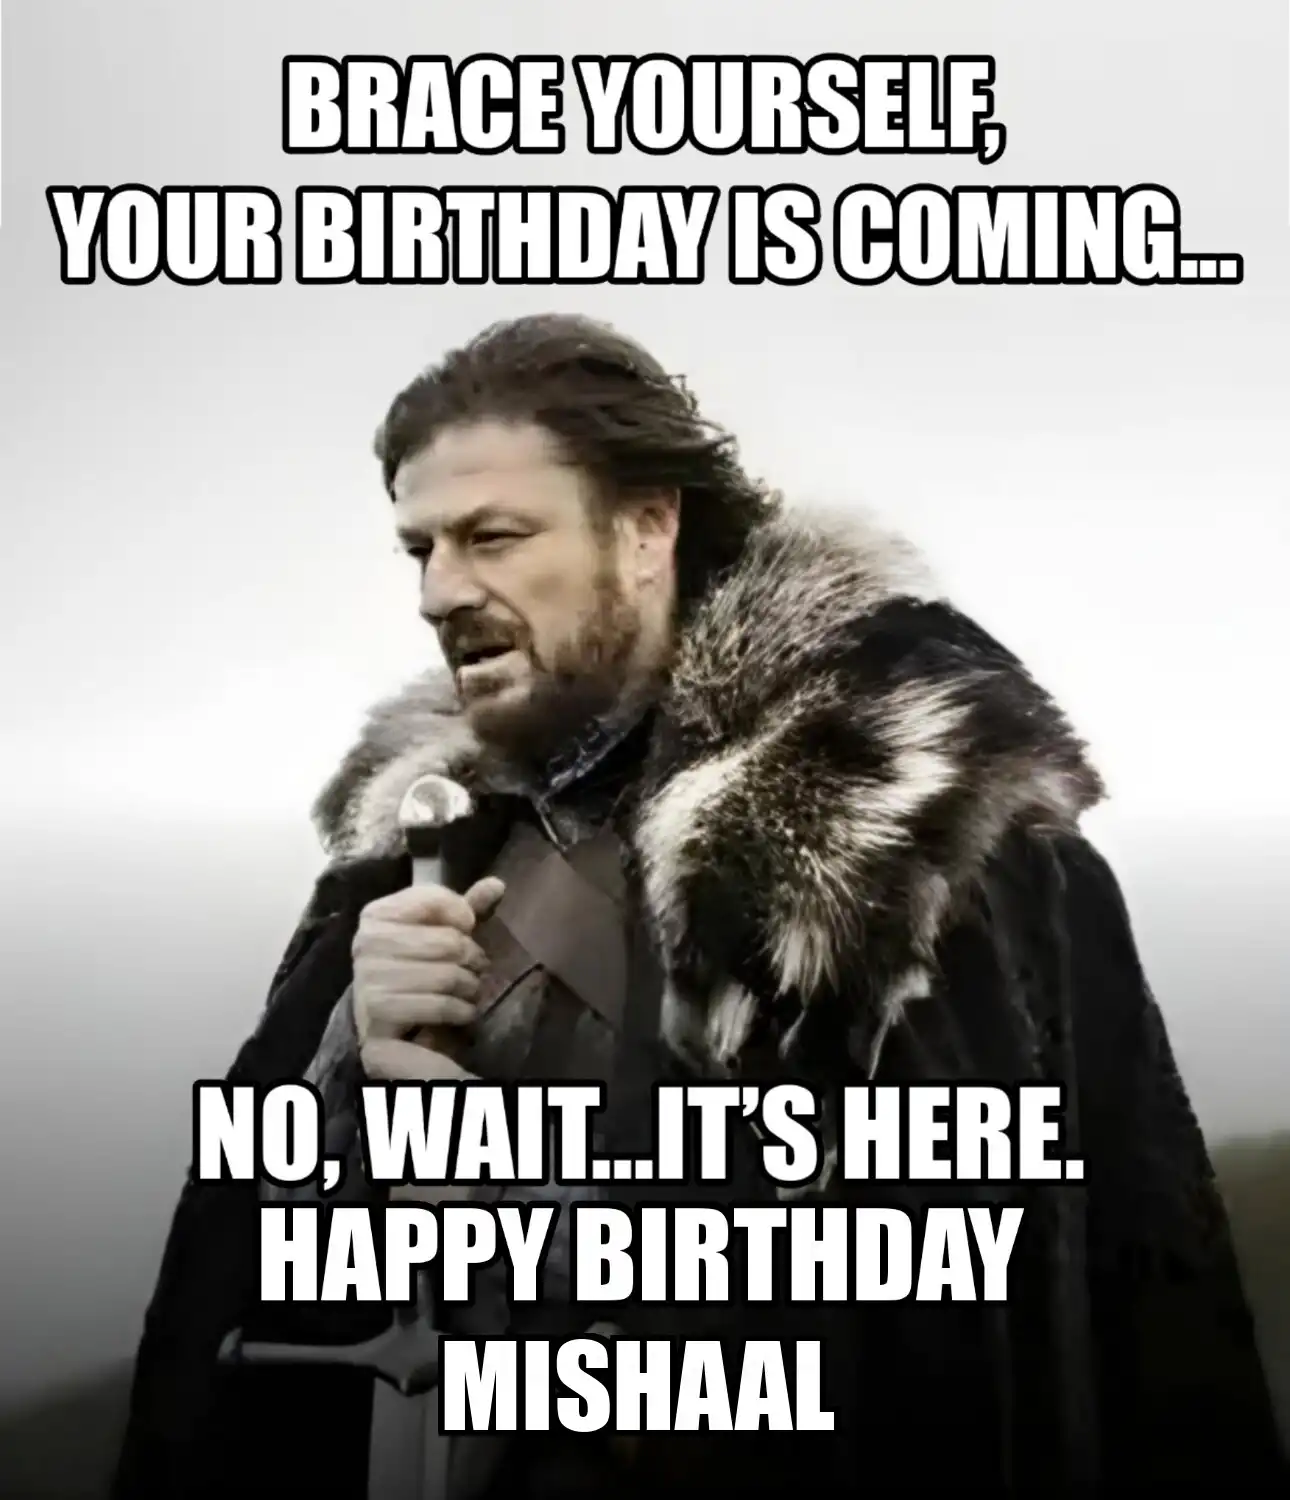 Happy Birthday Mishaal Brace Yourself Your Birthday Is Coming Meme